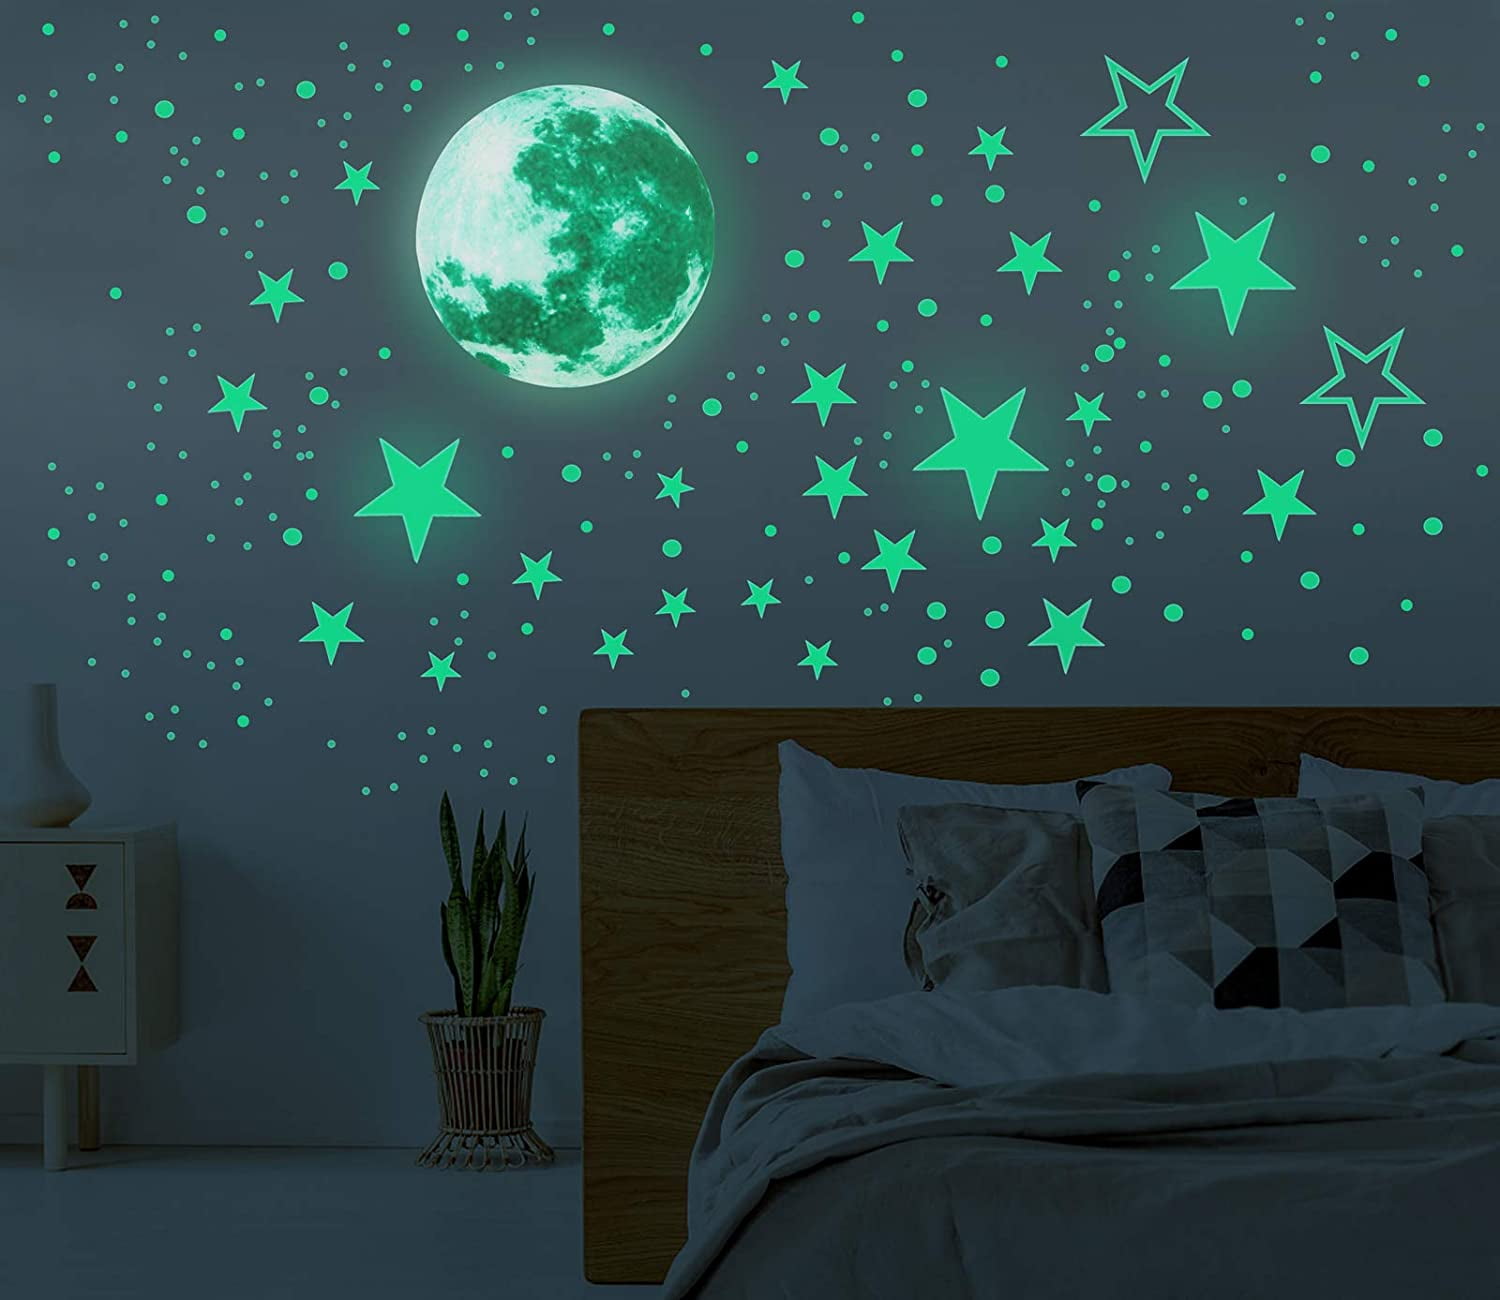 Home Luminous Noctilucent Moon Glow in the Dark Wall Non-toxic Stickers Decor US 